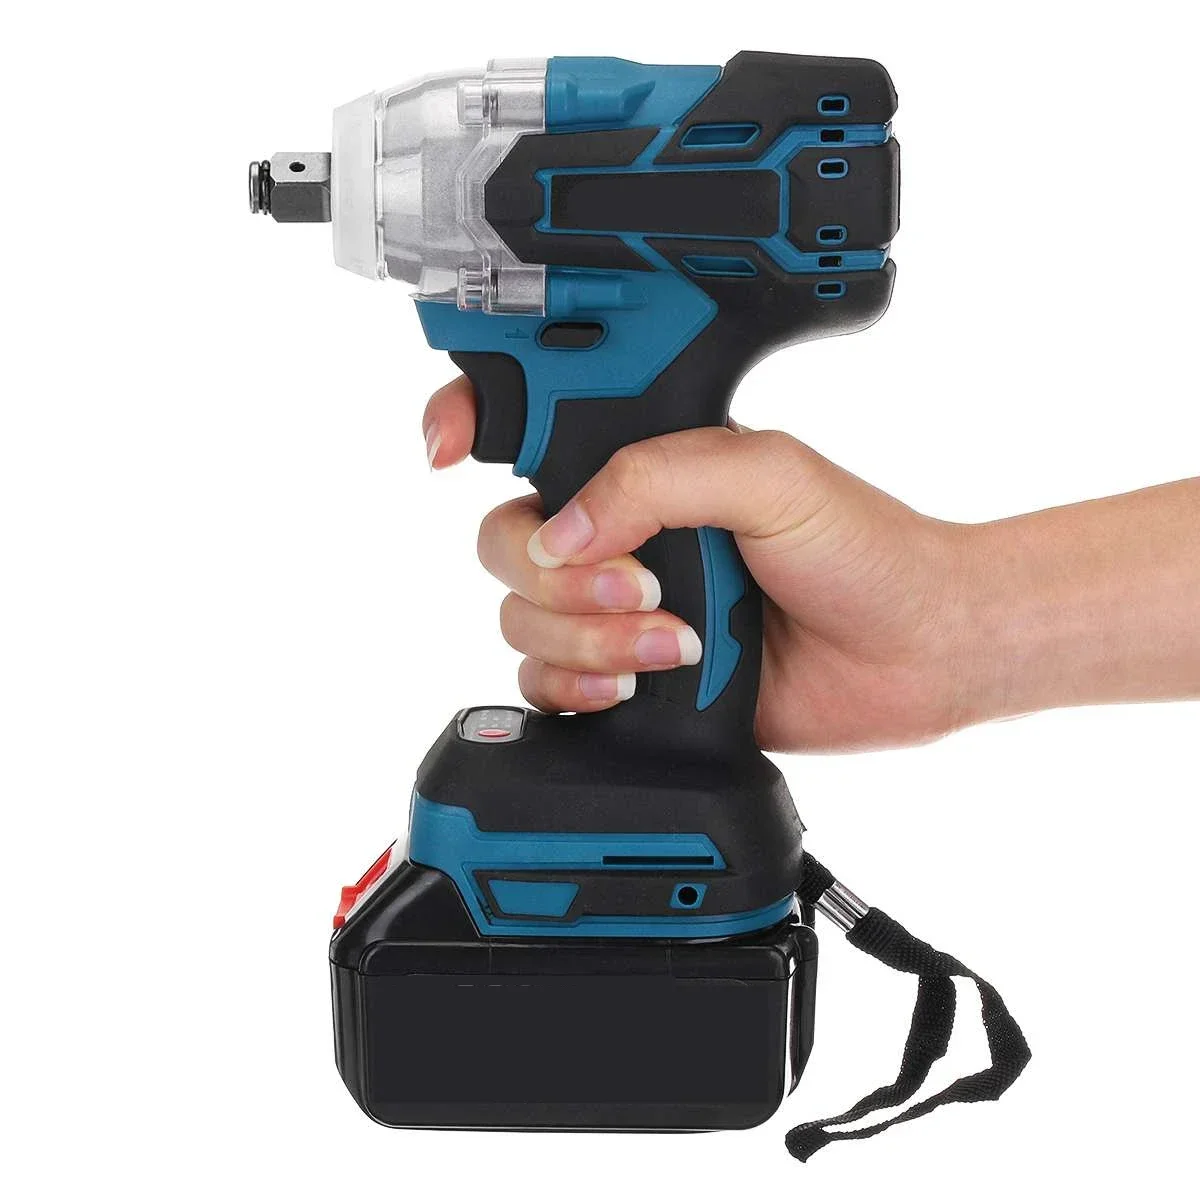 

18V Batterry Electric Impact Wrench 388vf 520N.M Brushless Cordless 1/2 inch Power Tools 2X15000Amh Li Battery Adapt to Makita